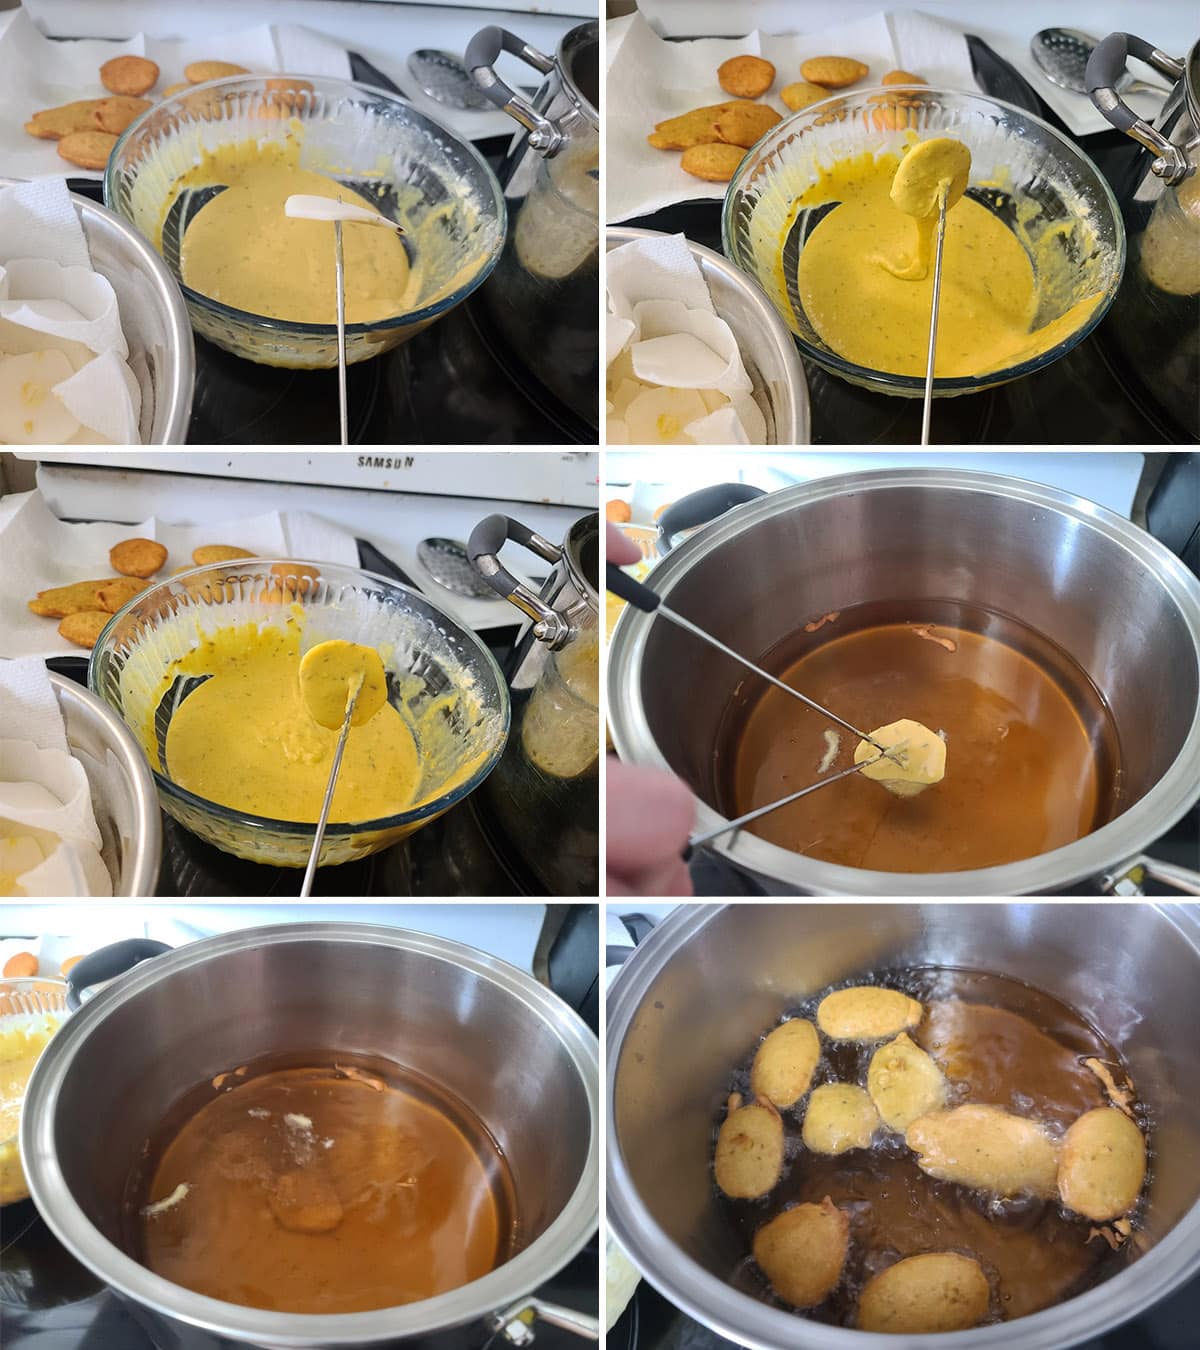 A 6 part image showing the potato slices being dipped in batter and deep fried.